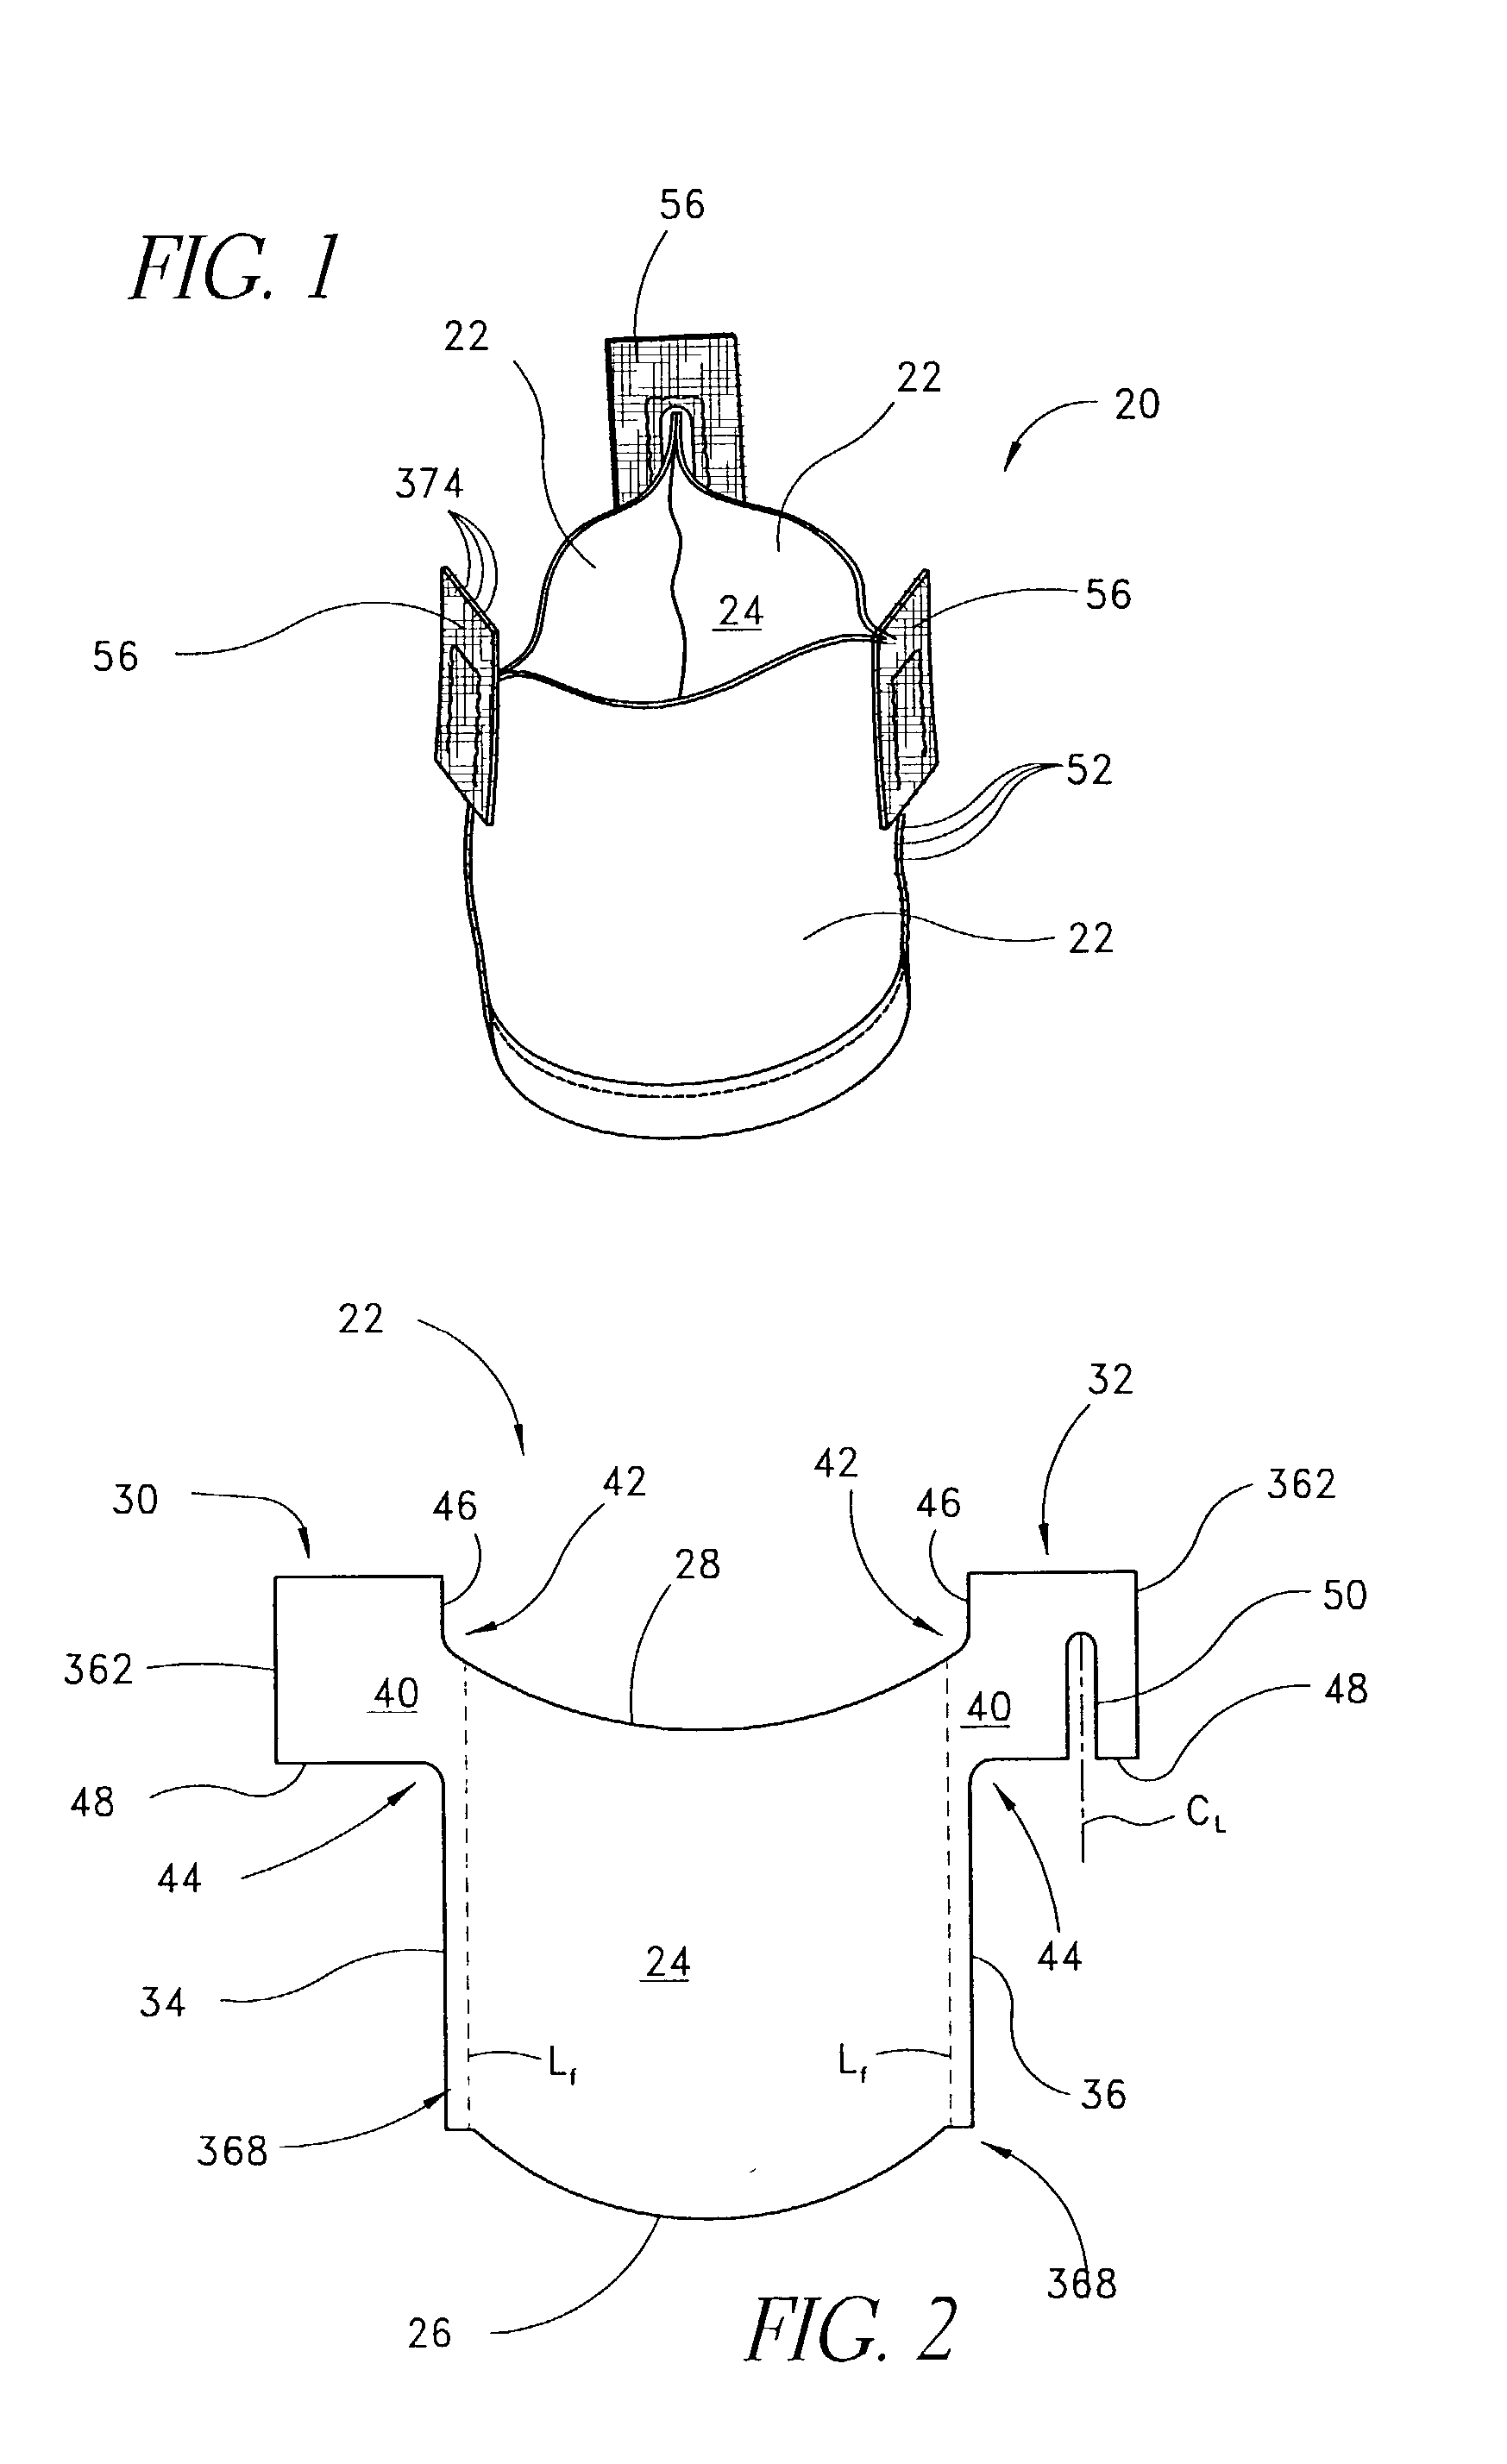 Method of cutting material for use in implantable medical device